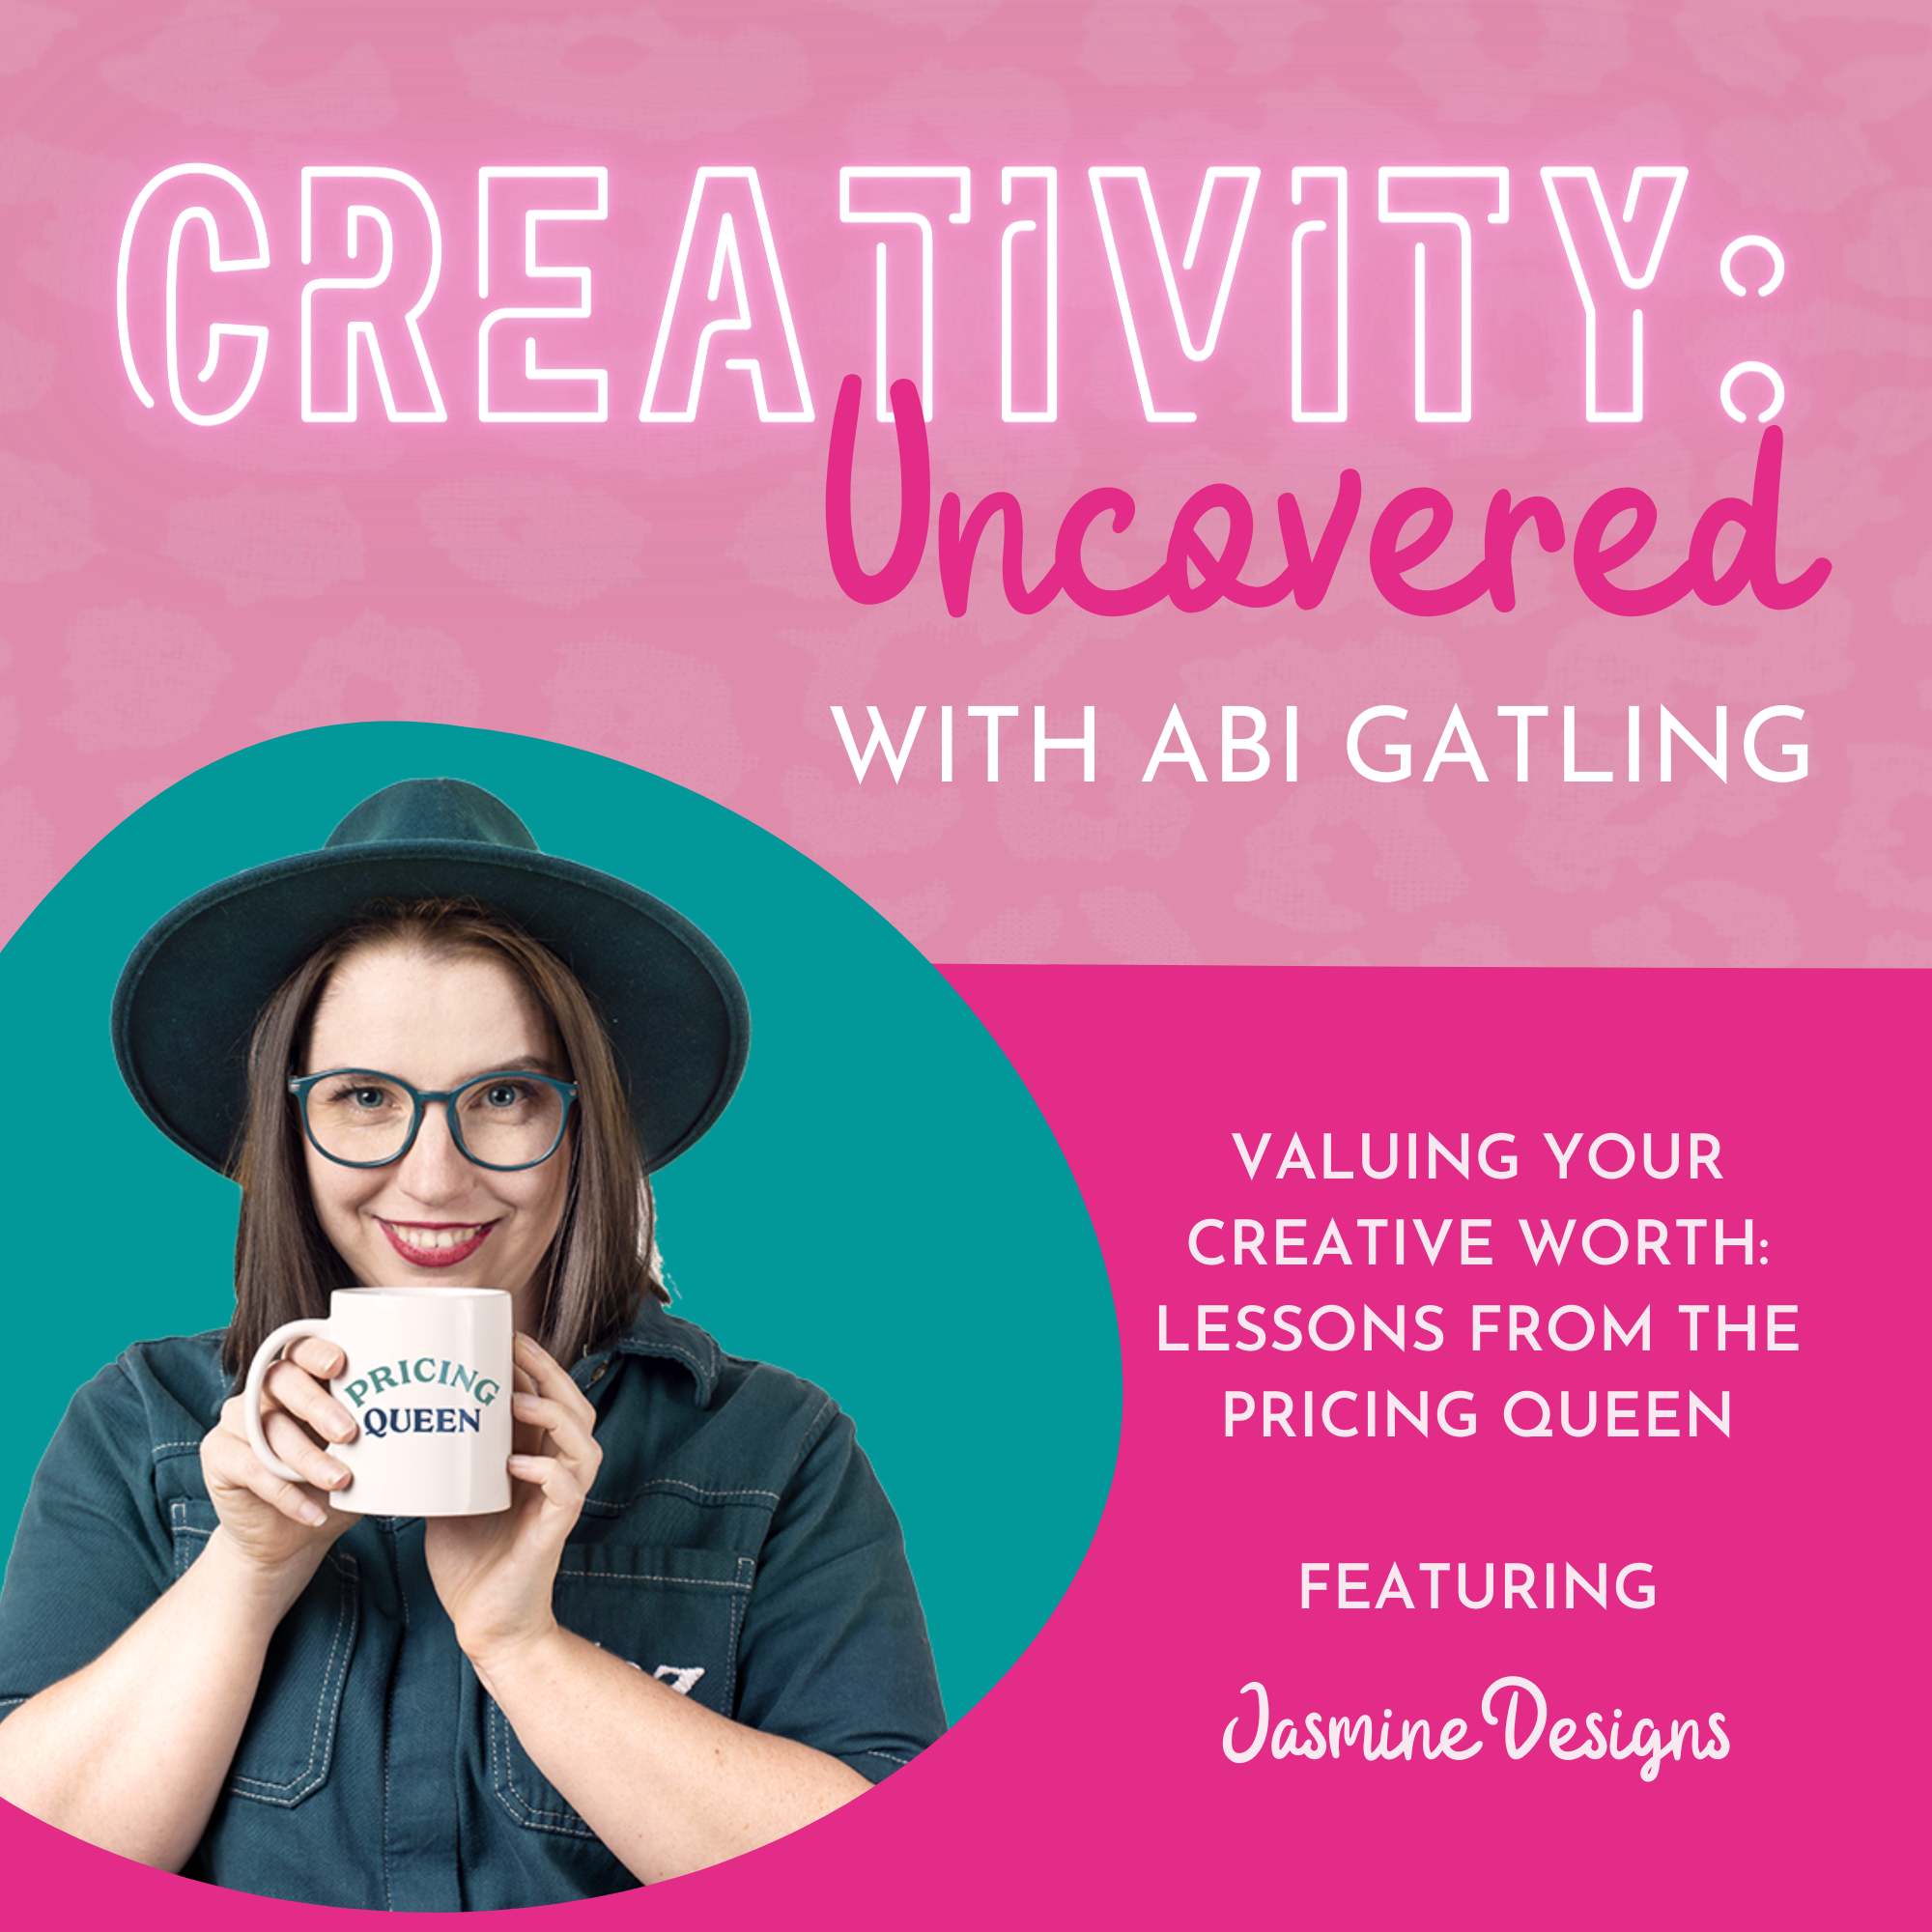 Creativity: Uncovered podcast episode graphic featuring guest Jasmine Designs